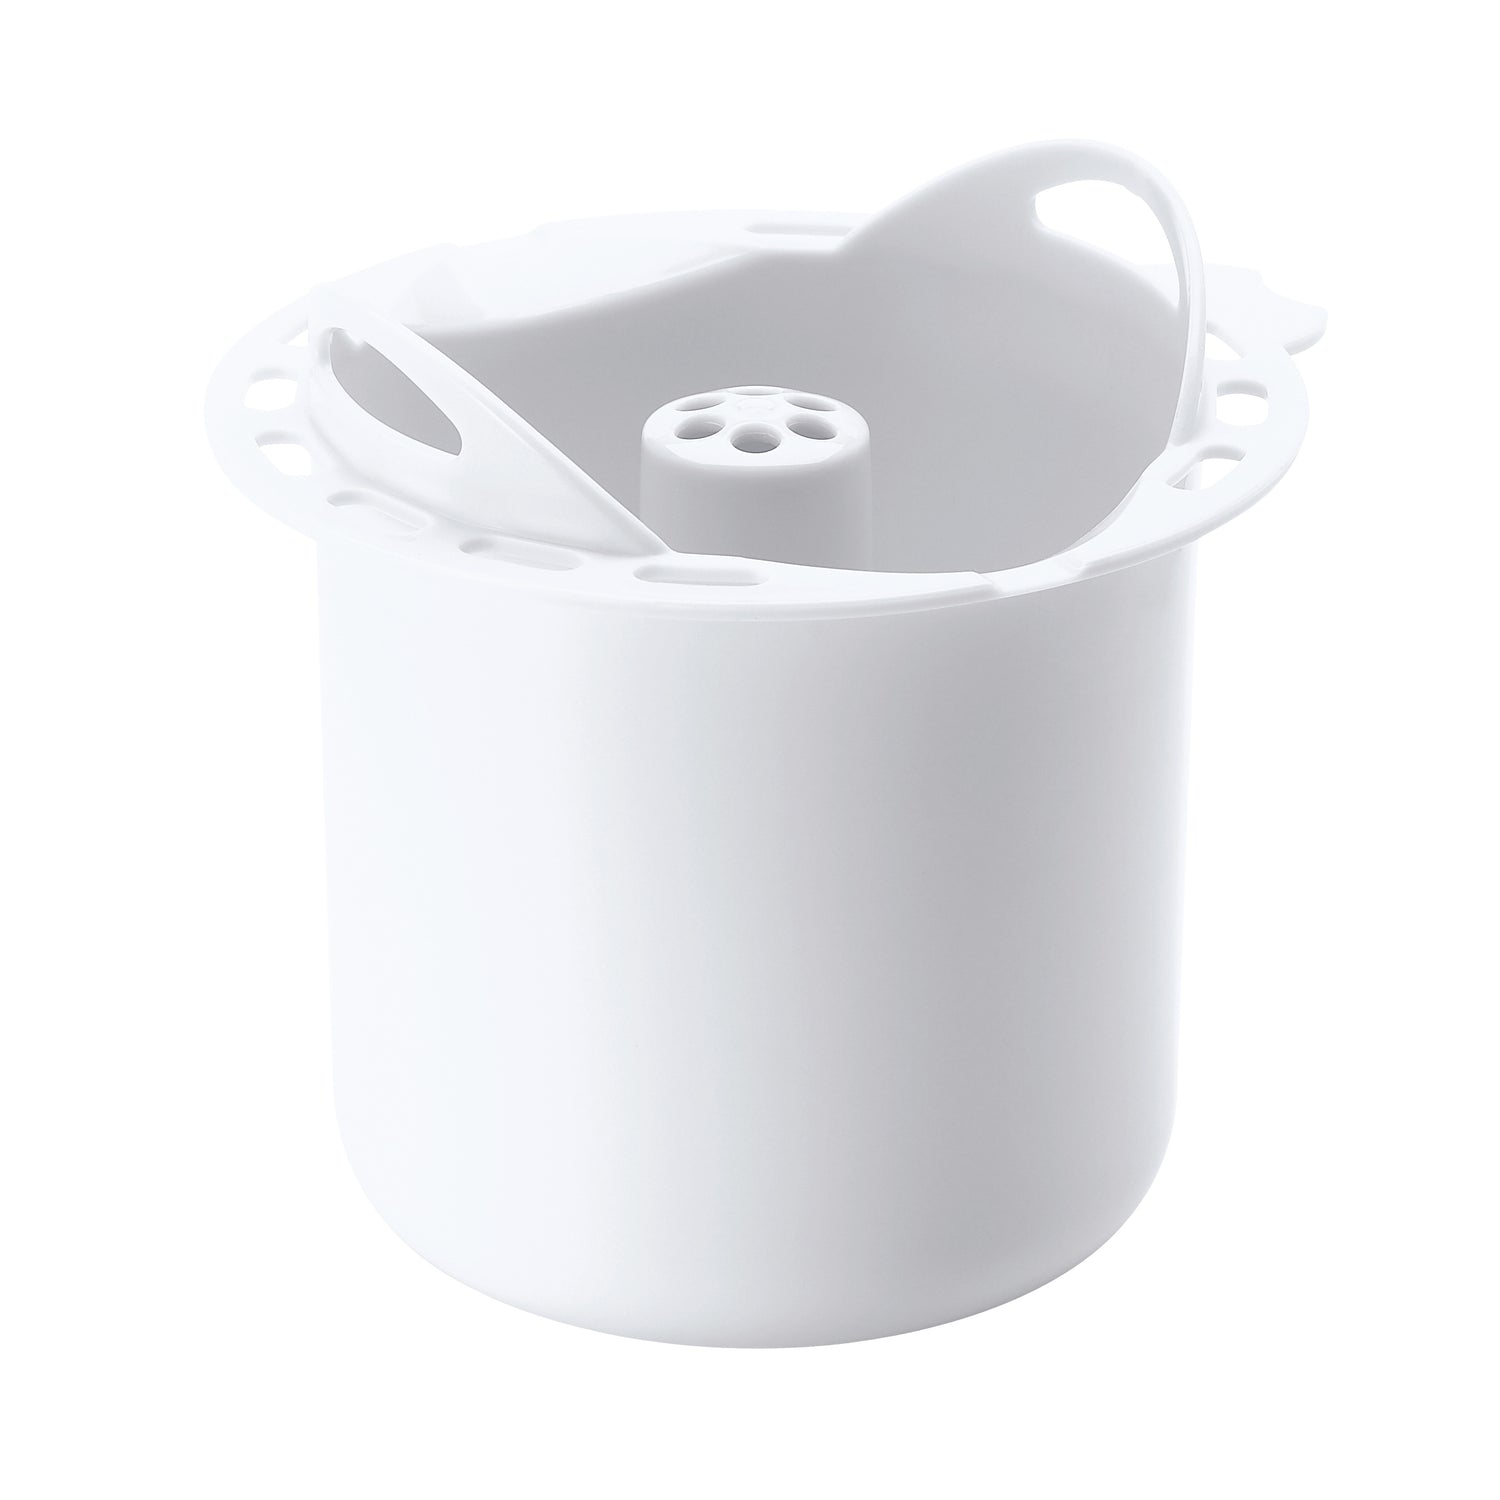 Solo and Duo Rice Cooker Insert Babycook - White